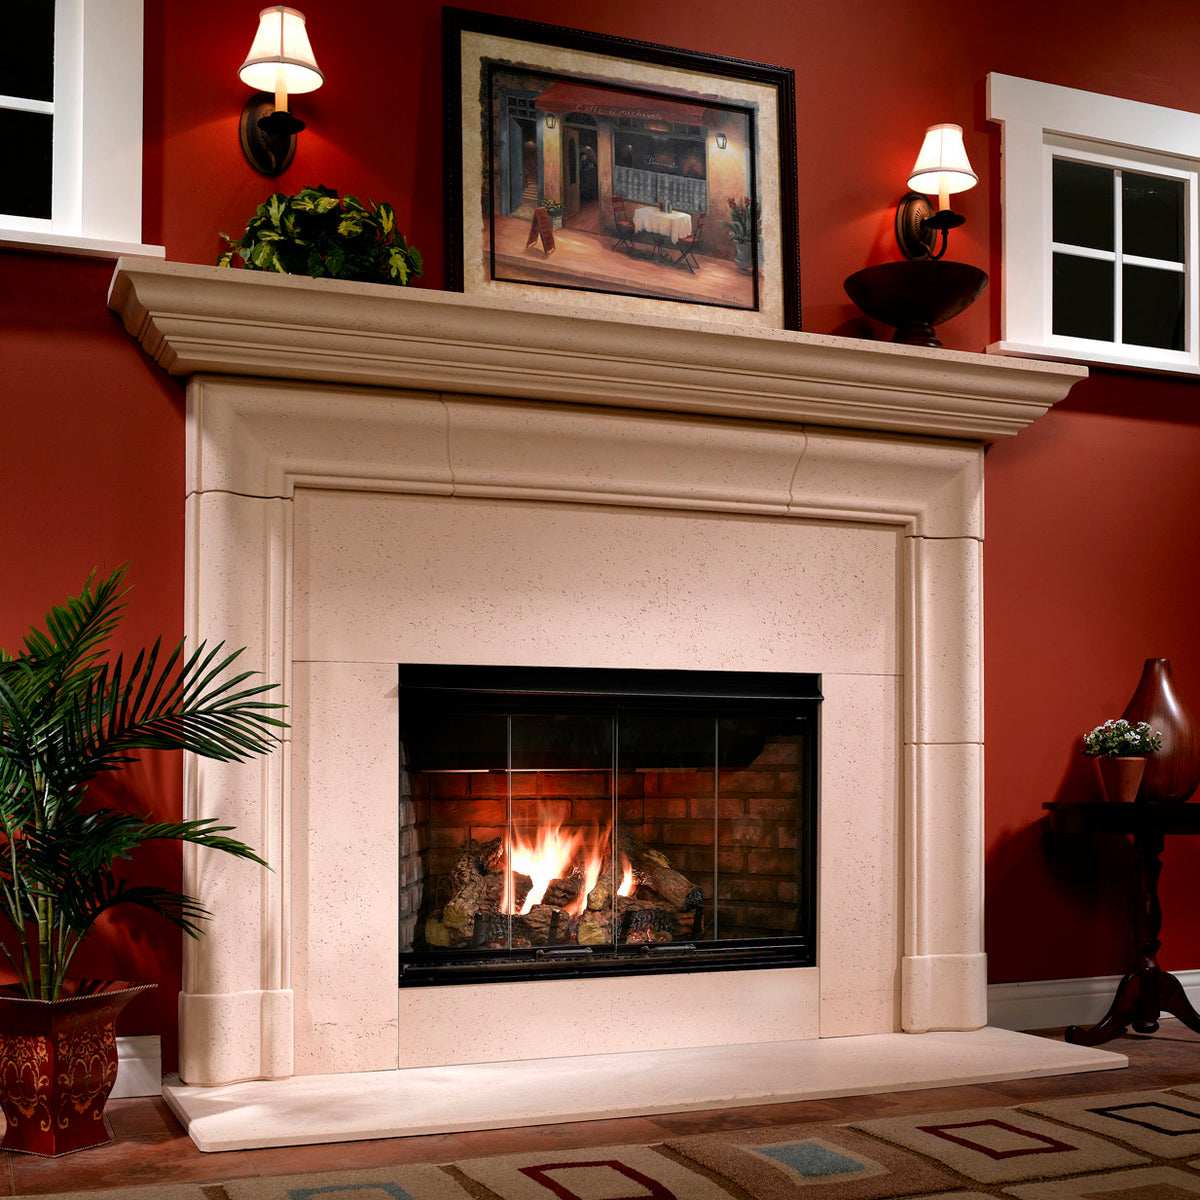 Majestic Reveal 36 B-Vent Traditional Gas Fireplace - Open Hearth, Radiant Unit with IntelliFire NG with Traditional Brick Refractory